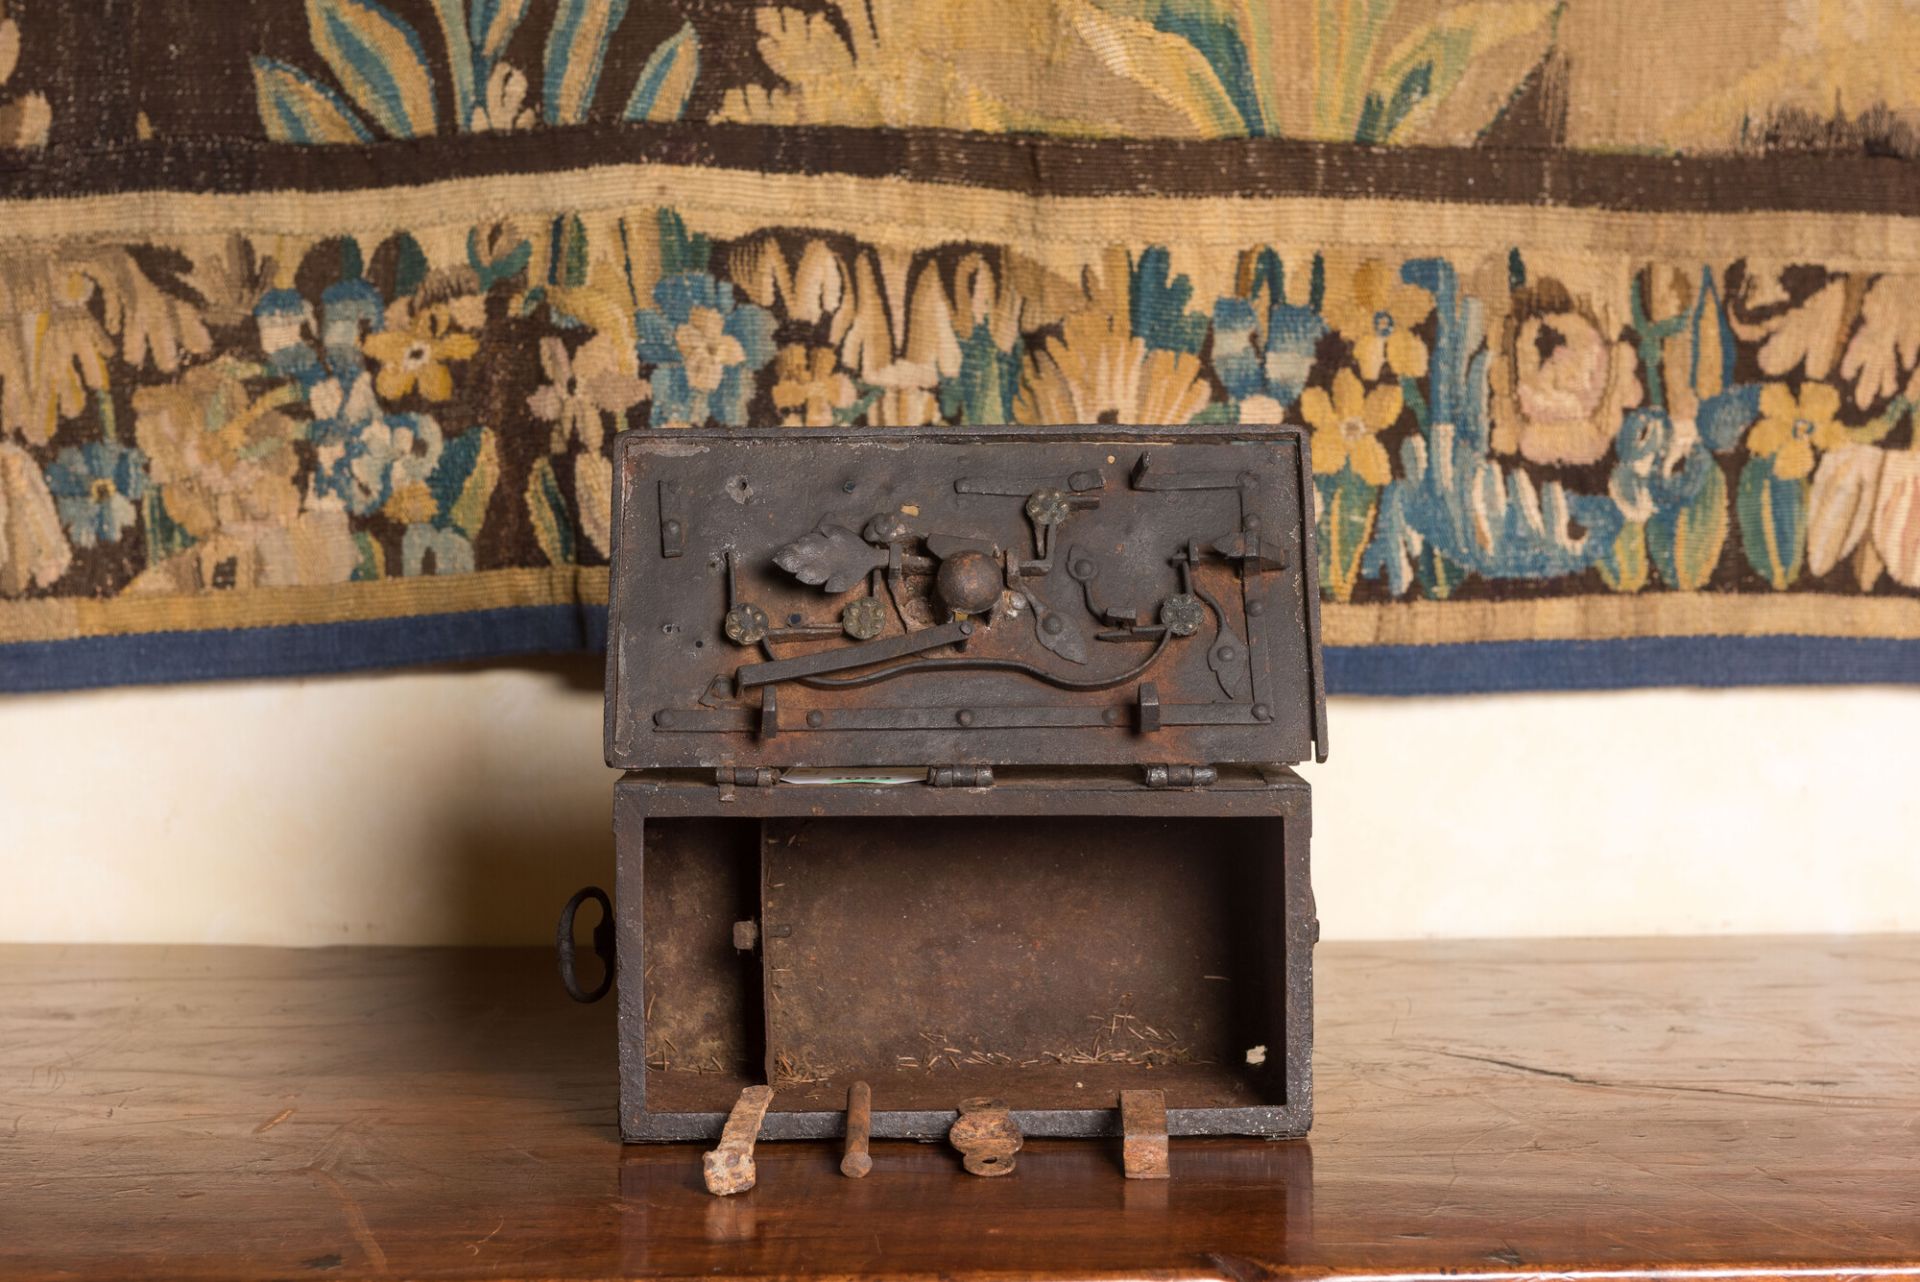 A wrought iron money box or strongbox, 16/17th C. - Image 5 of 5